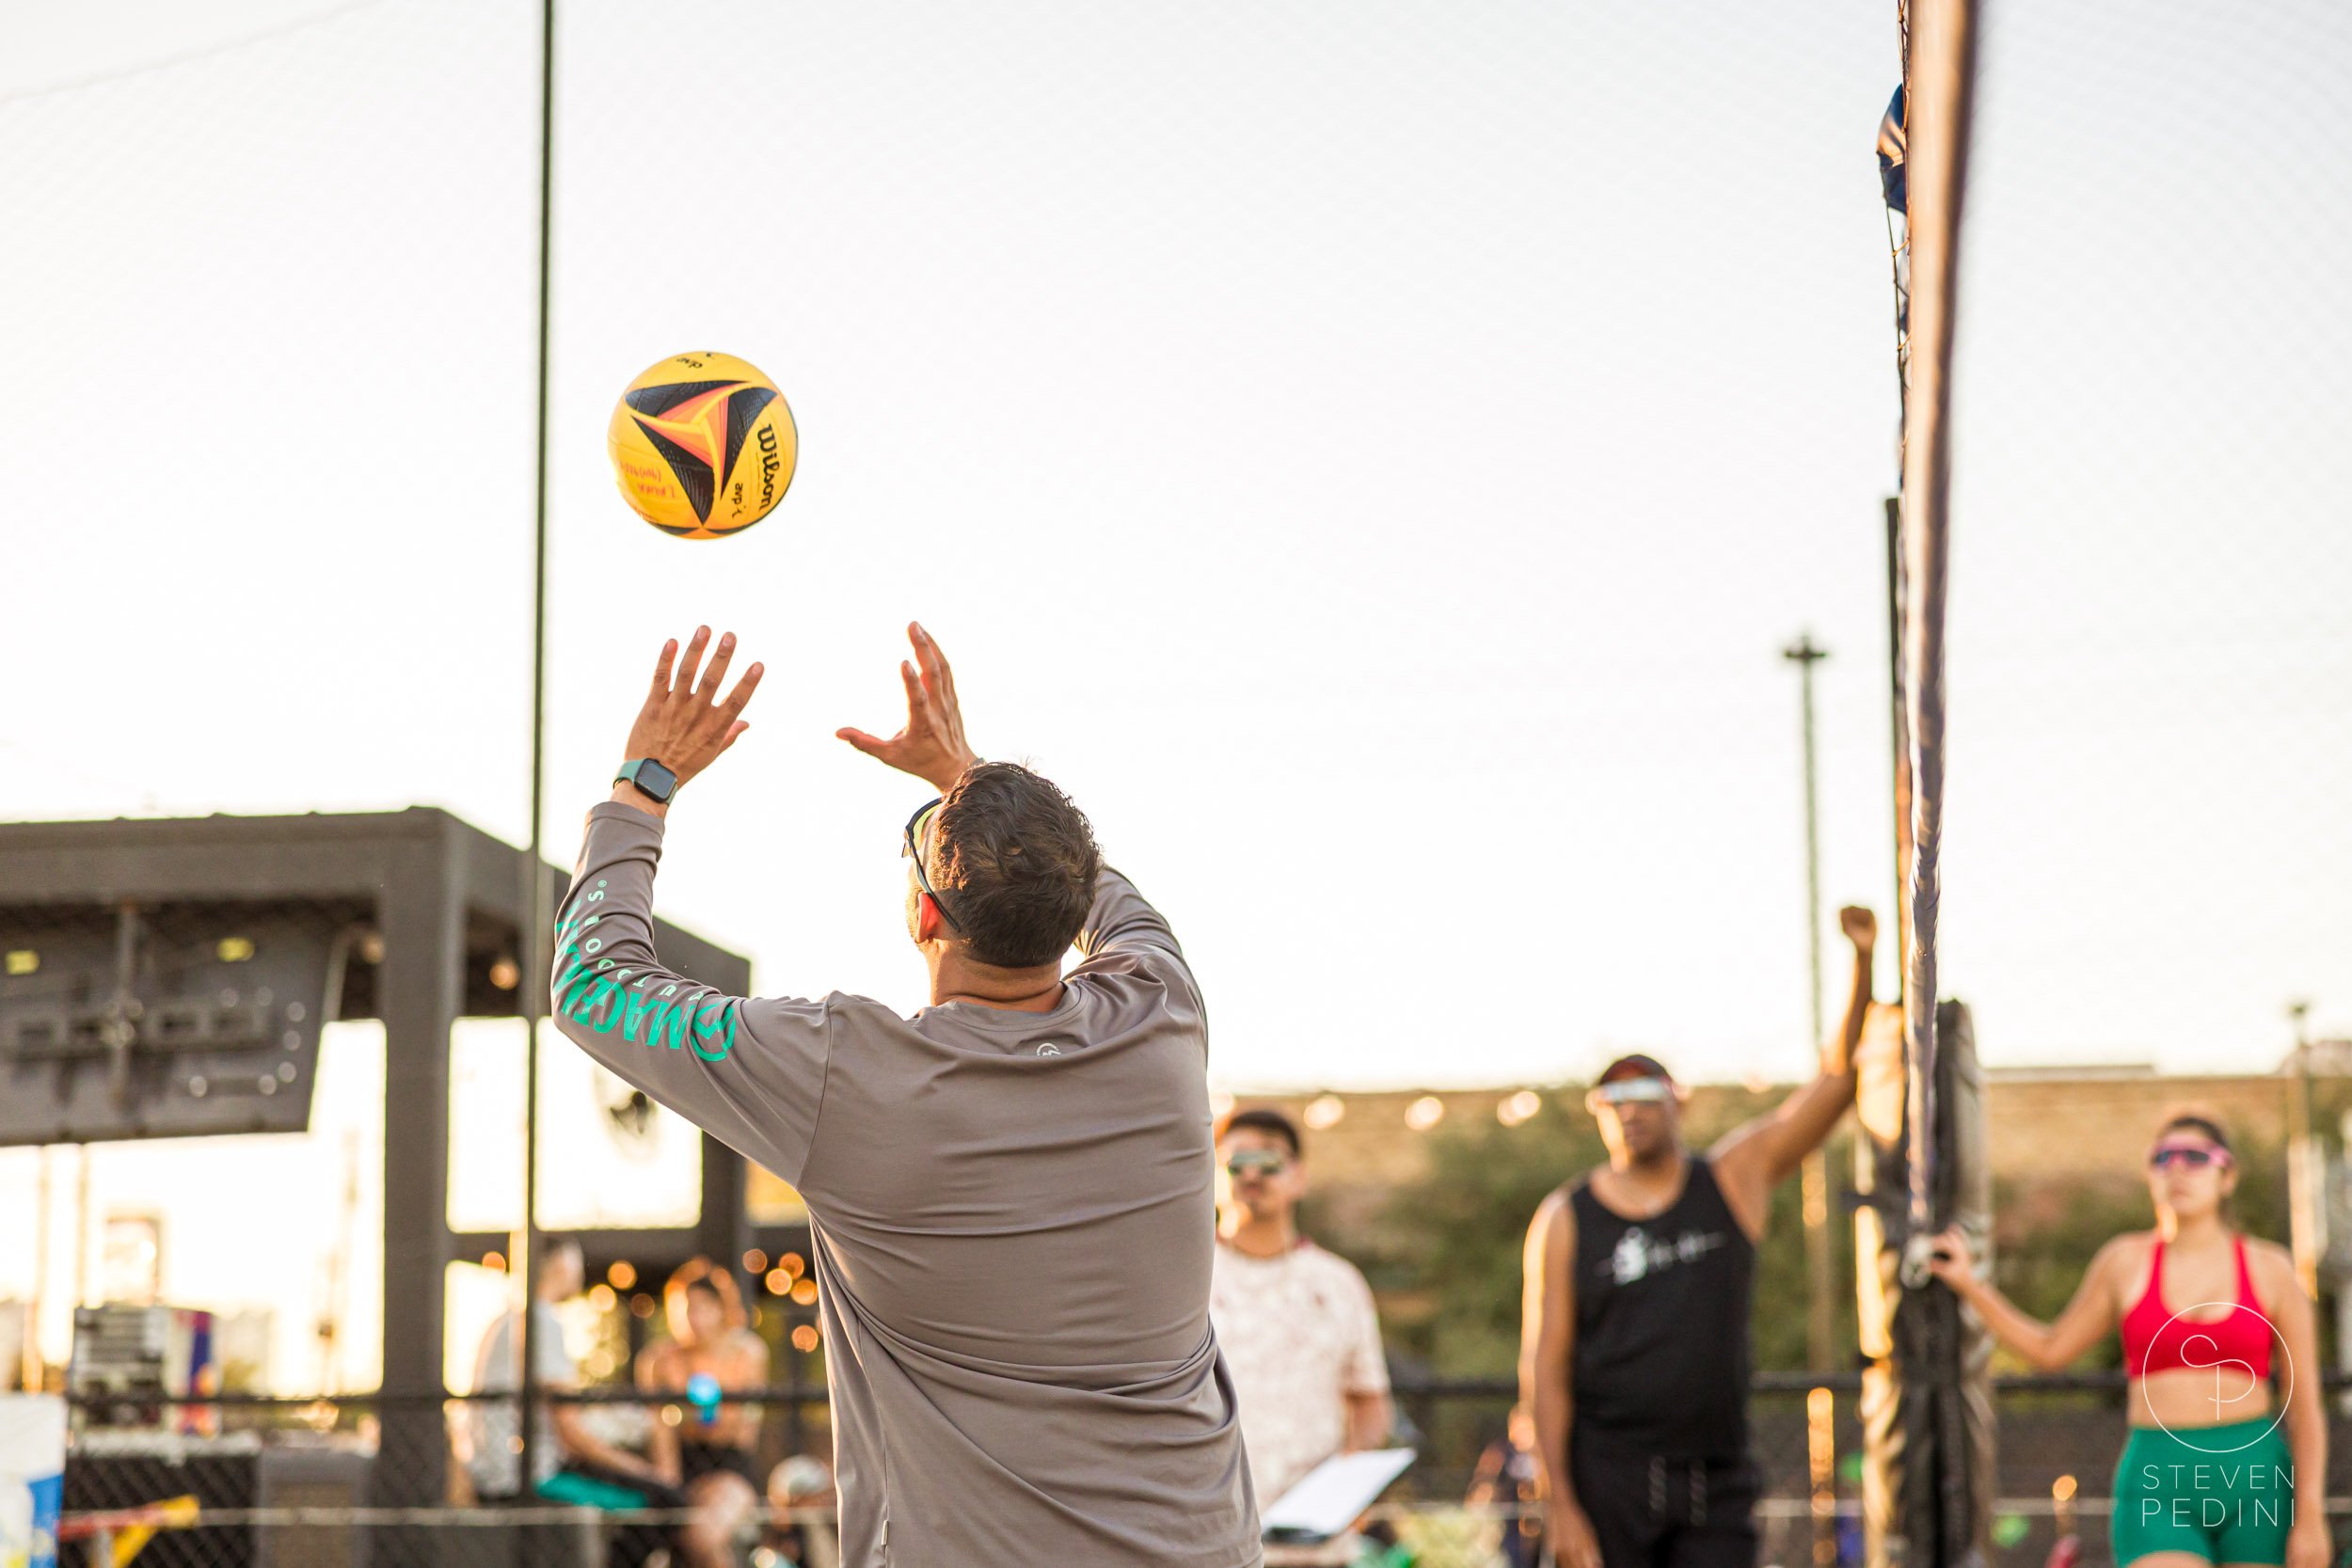 Steven Pedini Photography - Bumpy Pickle - Sand Volleyball - Houston TX - World Cup of Volleyball - 00203.jpg